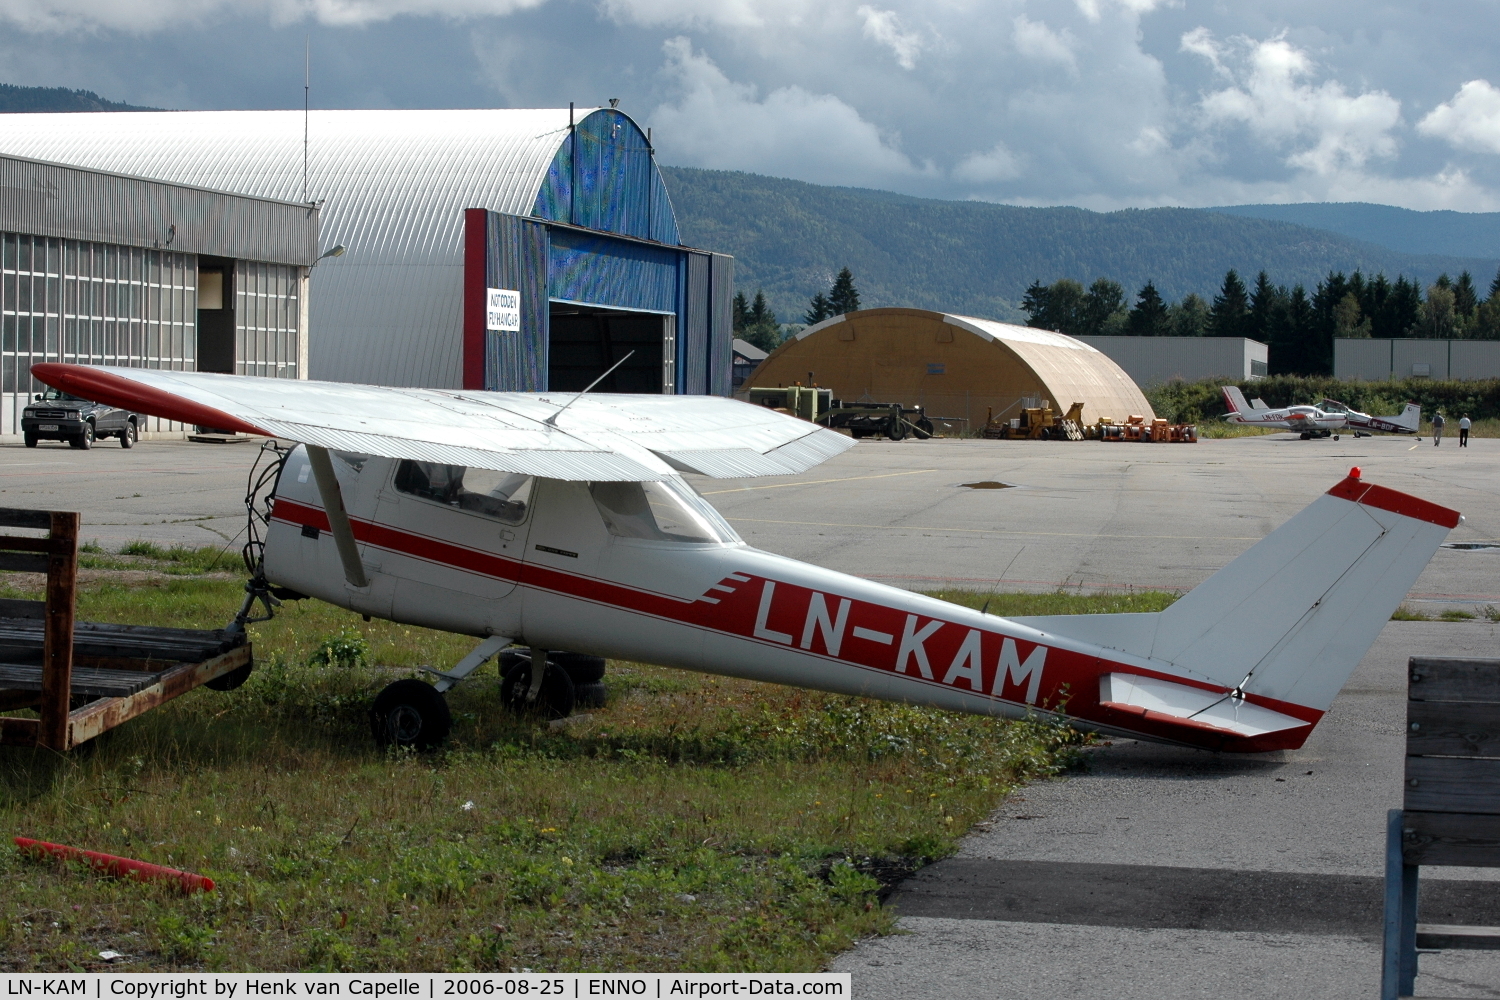 LN-KAM, Reims F150G C/N F150-0111, Cessna F150G without engine at Notudden airfield, Norway.